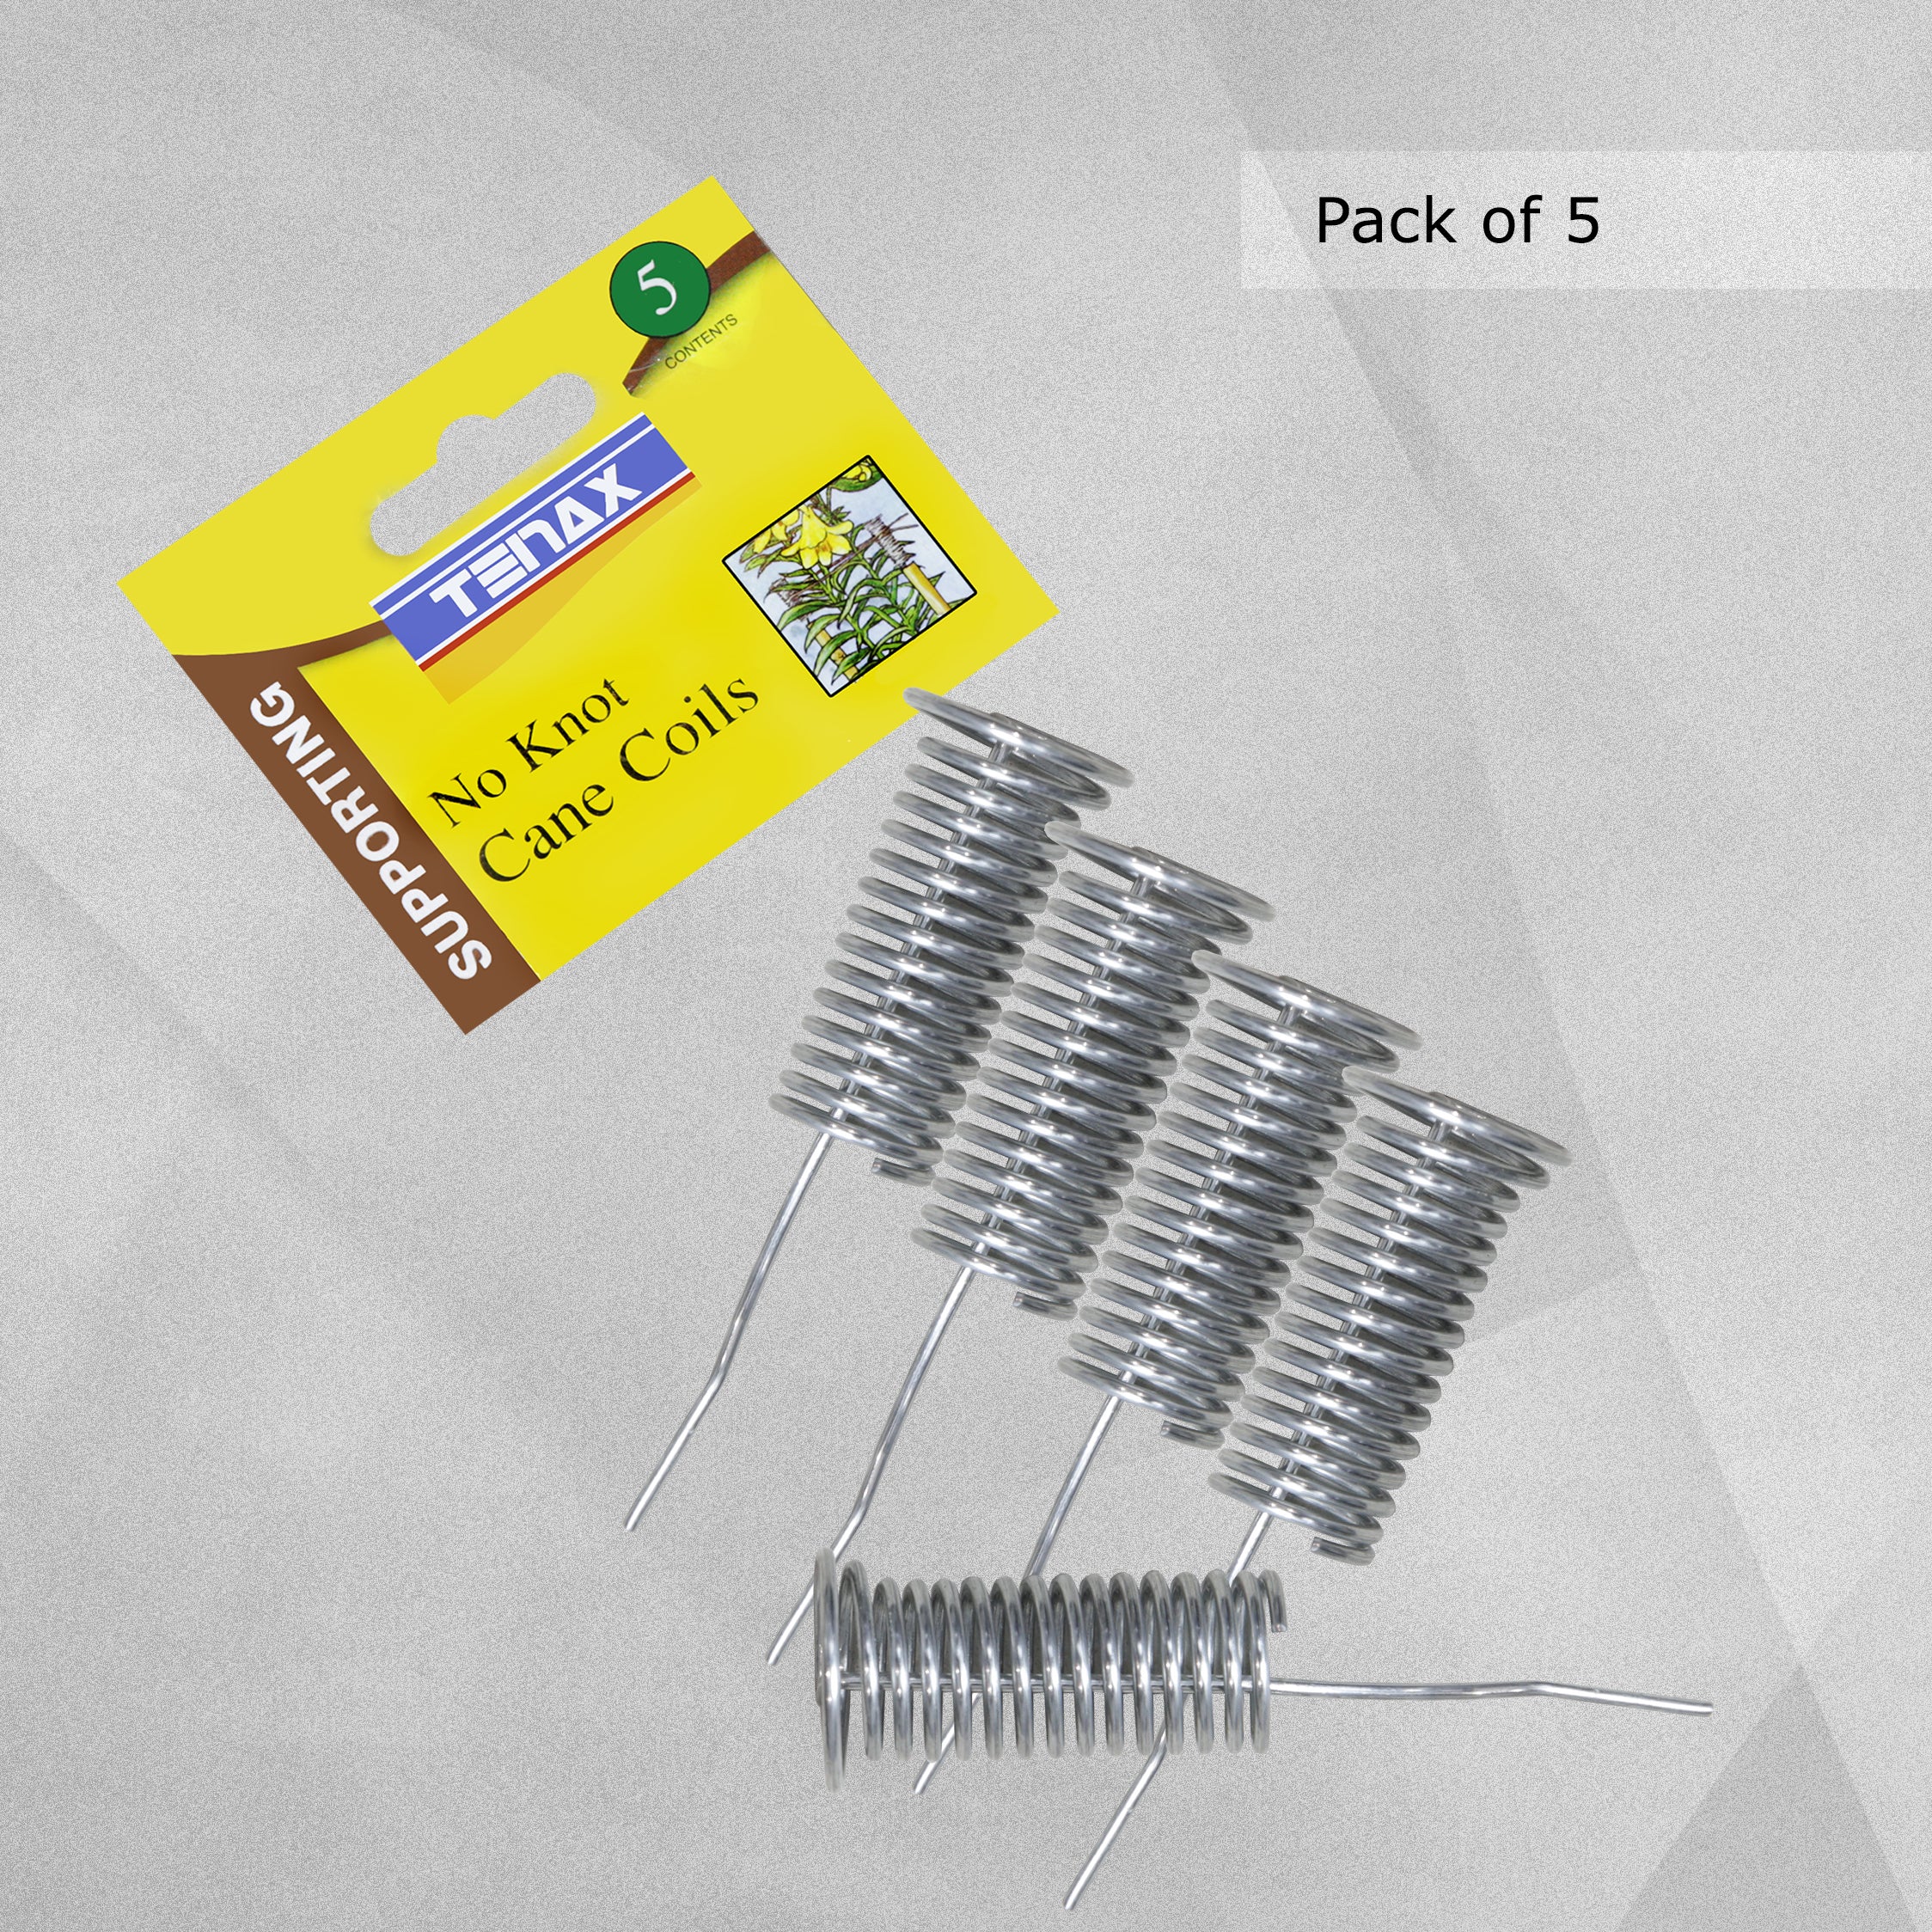 Bamboo Cane Coils - Tenax No Knot Coils, Pack of 5